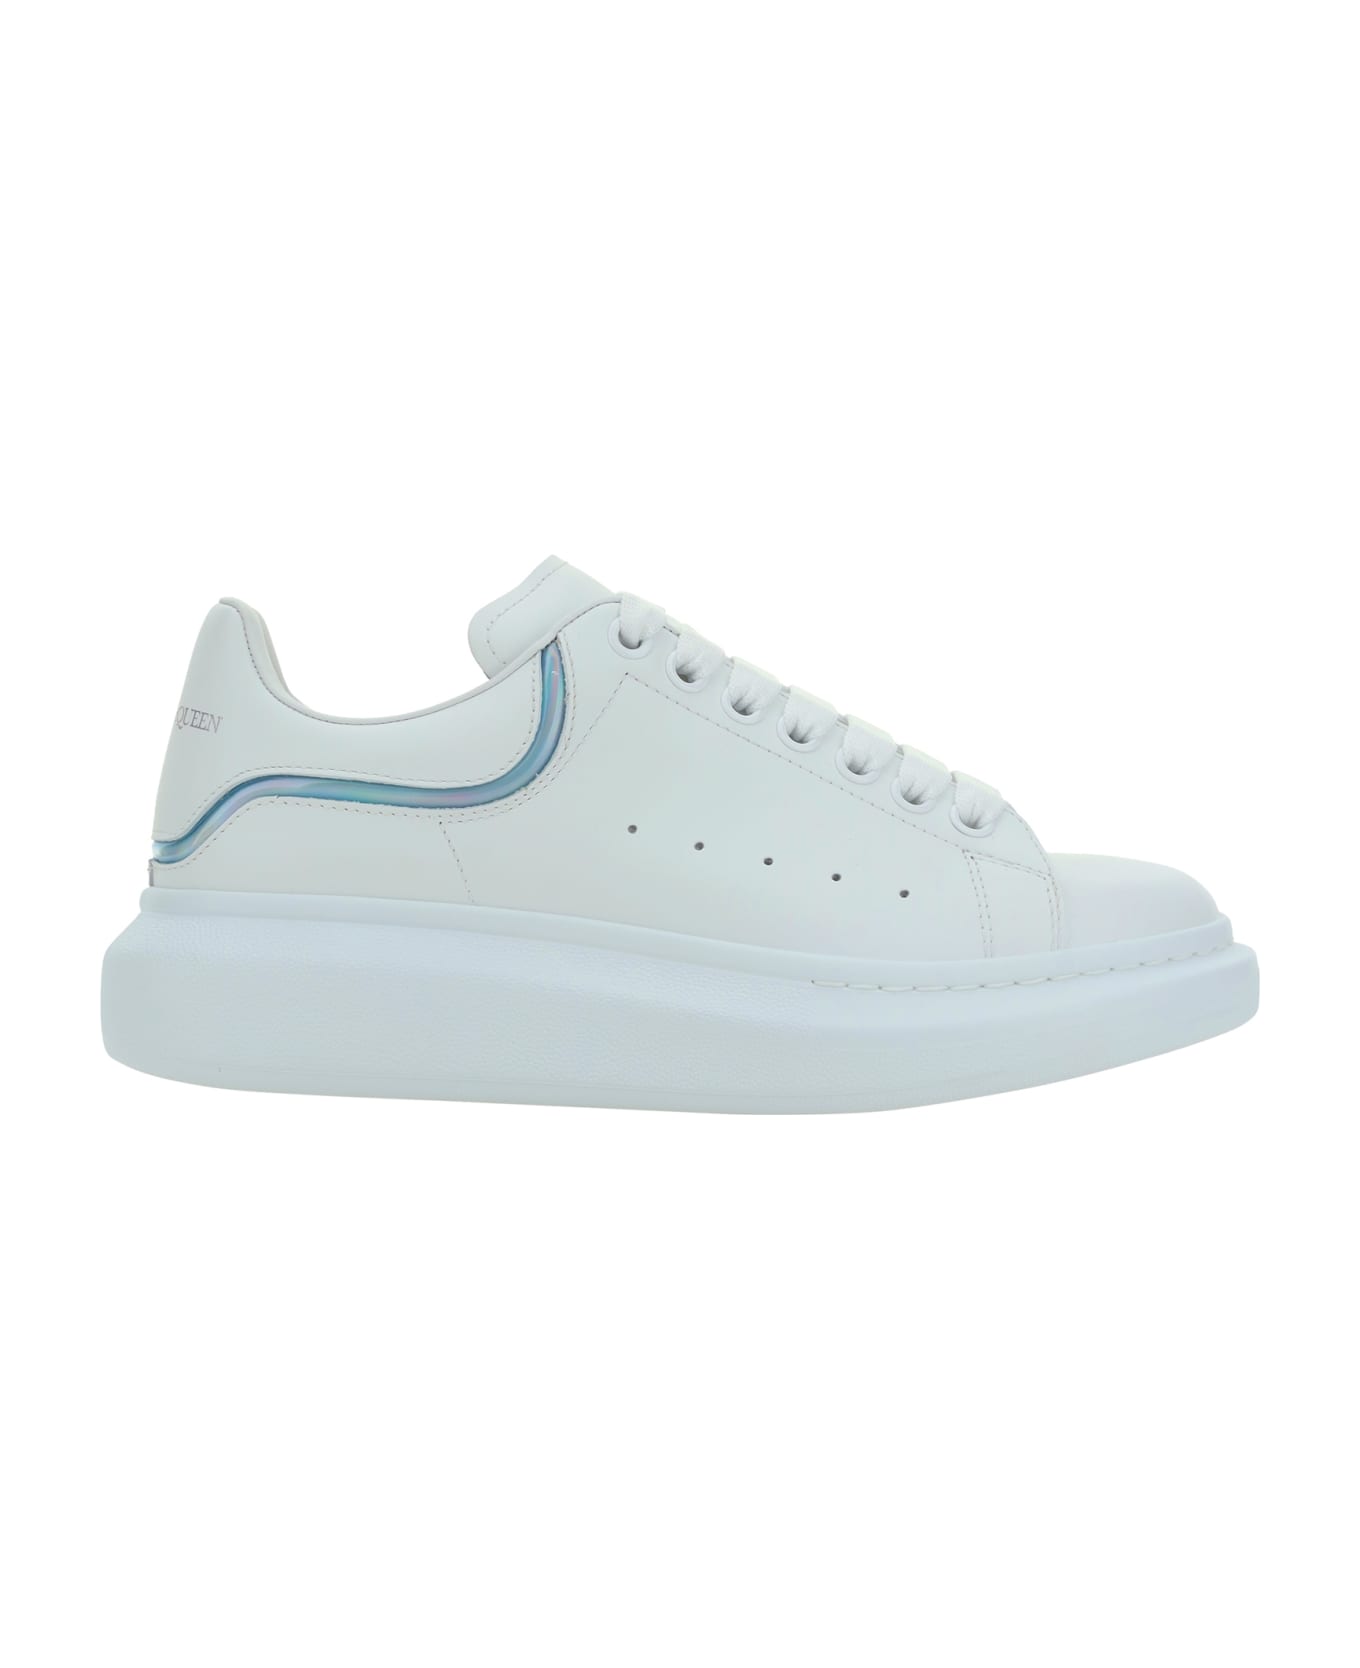 Alexander McQueen Larry Leather Sneakers - White/paradise Blue